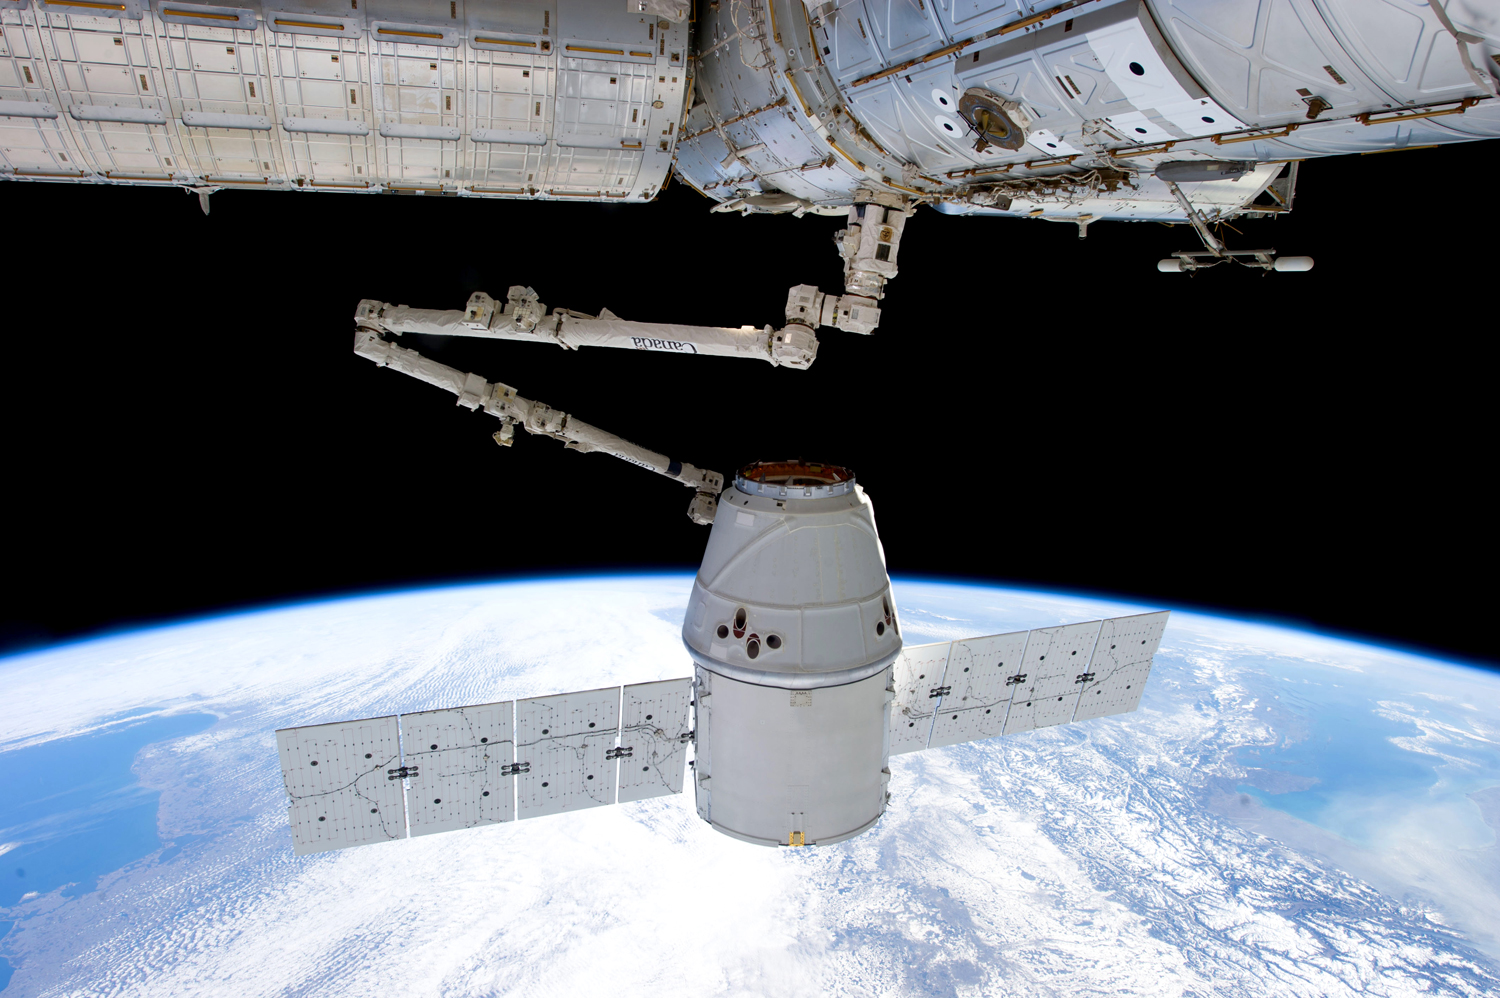 SpaceX's Dragon is grappled by the International Space Station on April 13, 2013.